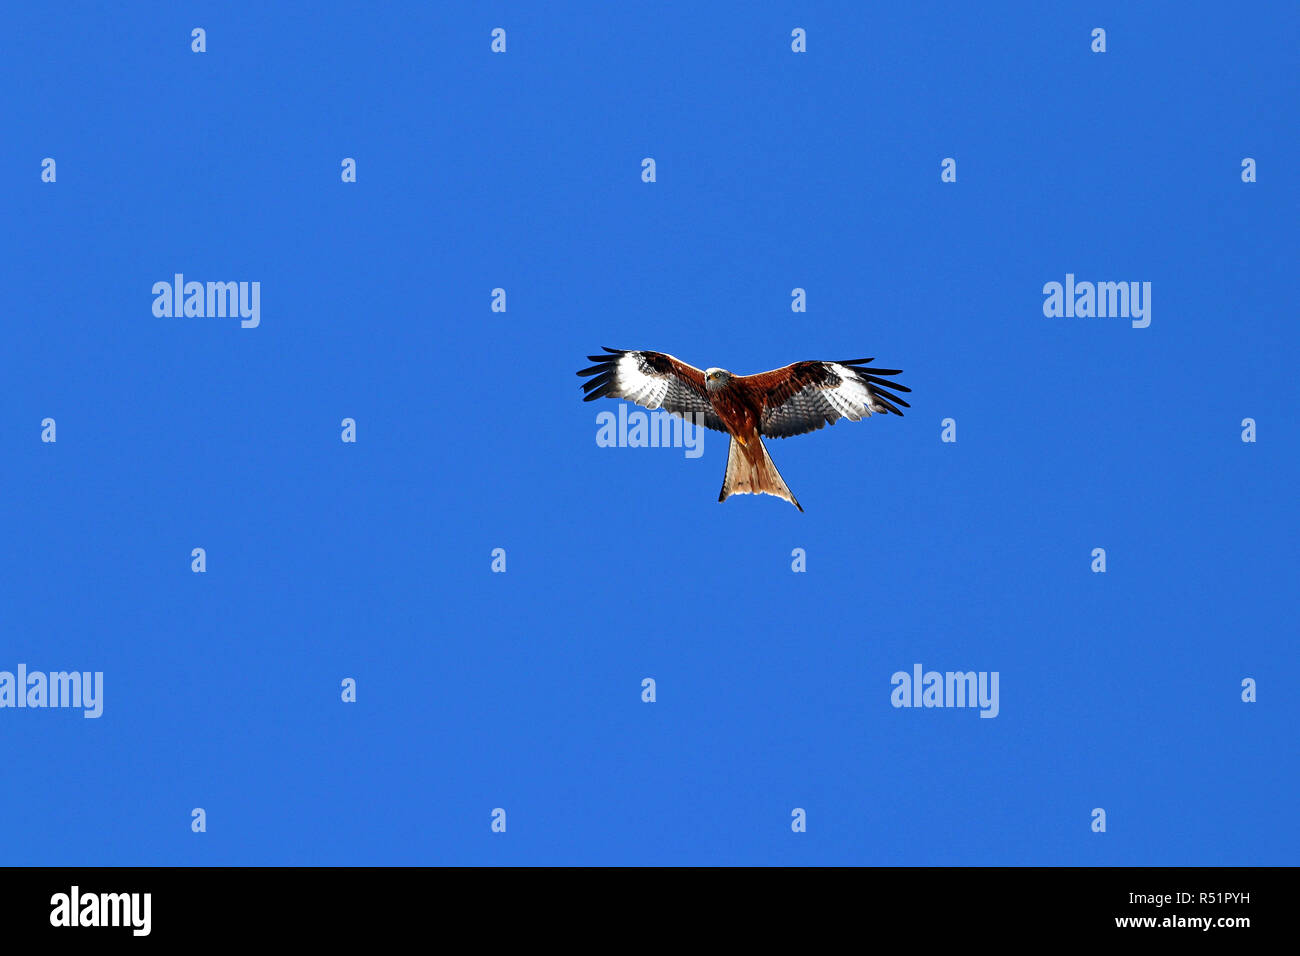 a red kite or red kite in the blue sky Stock Photo